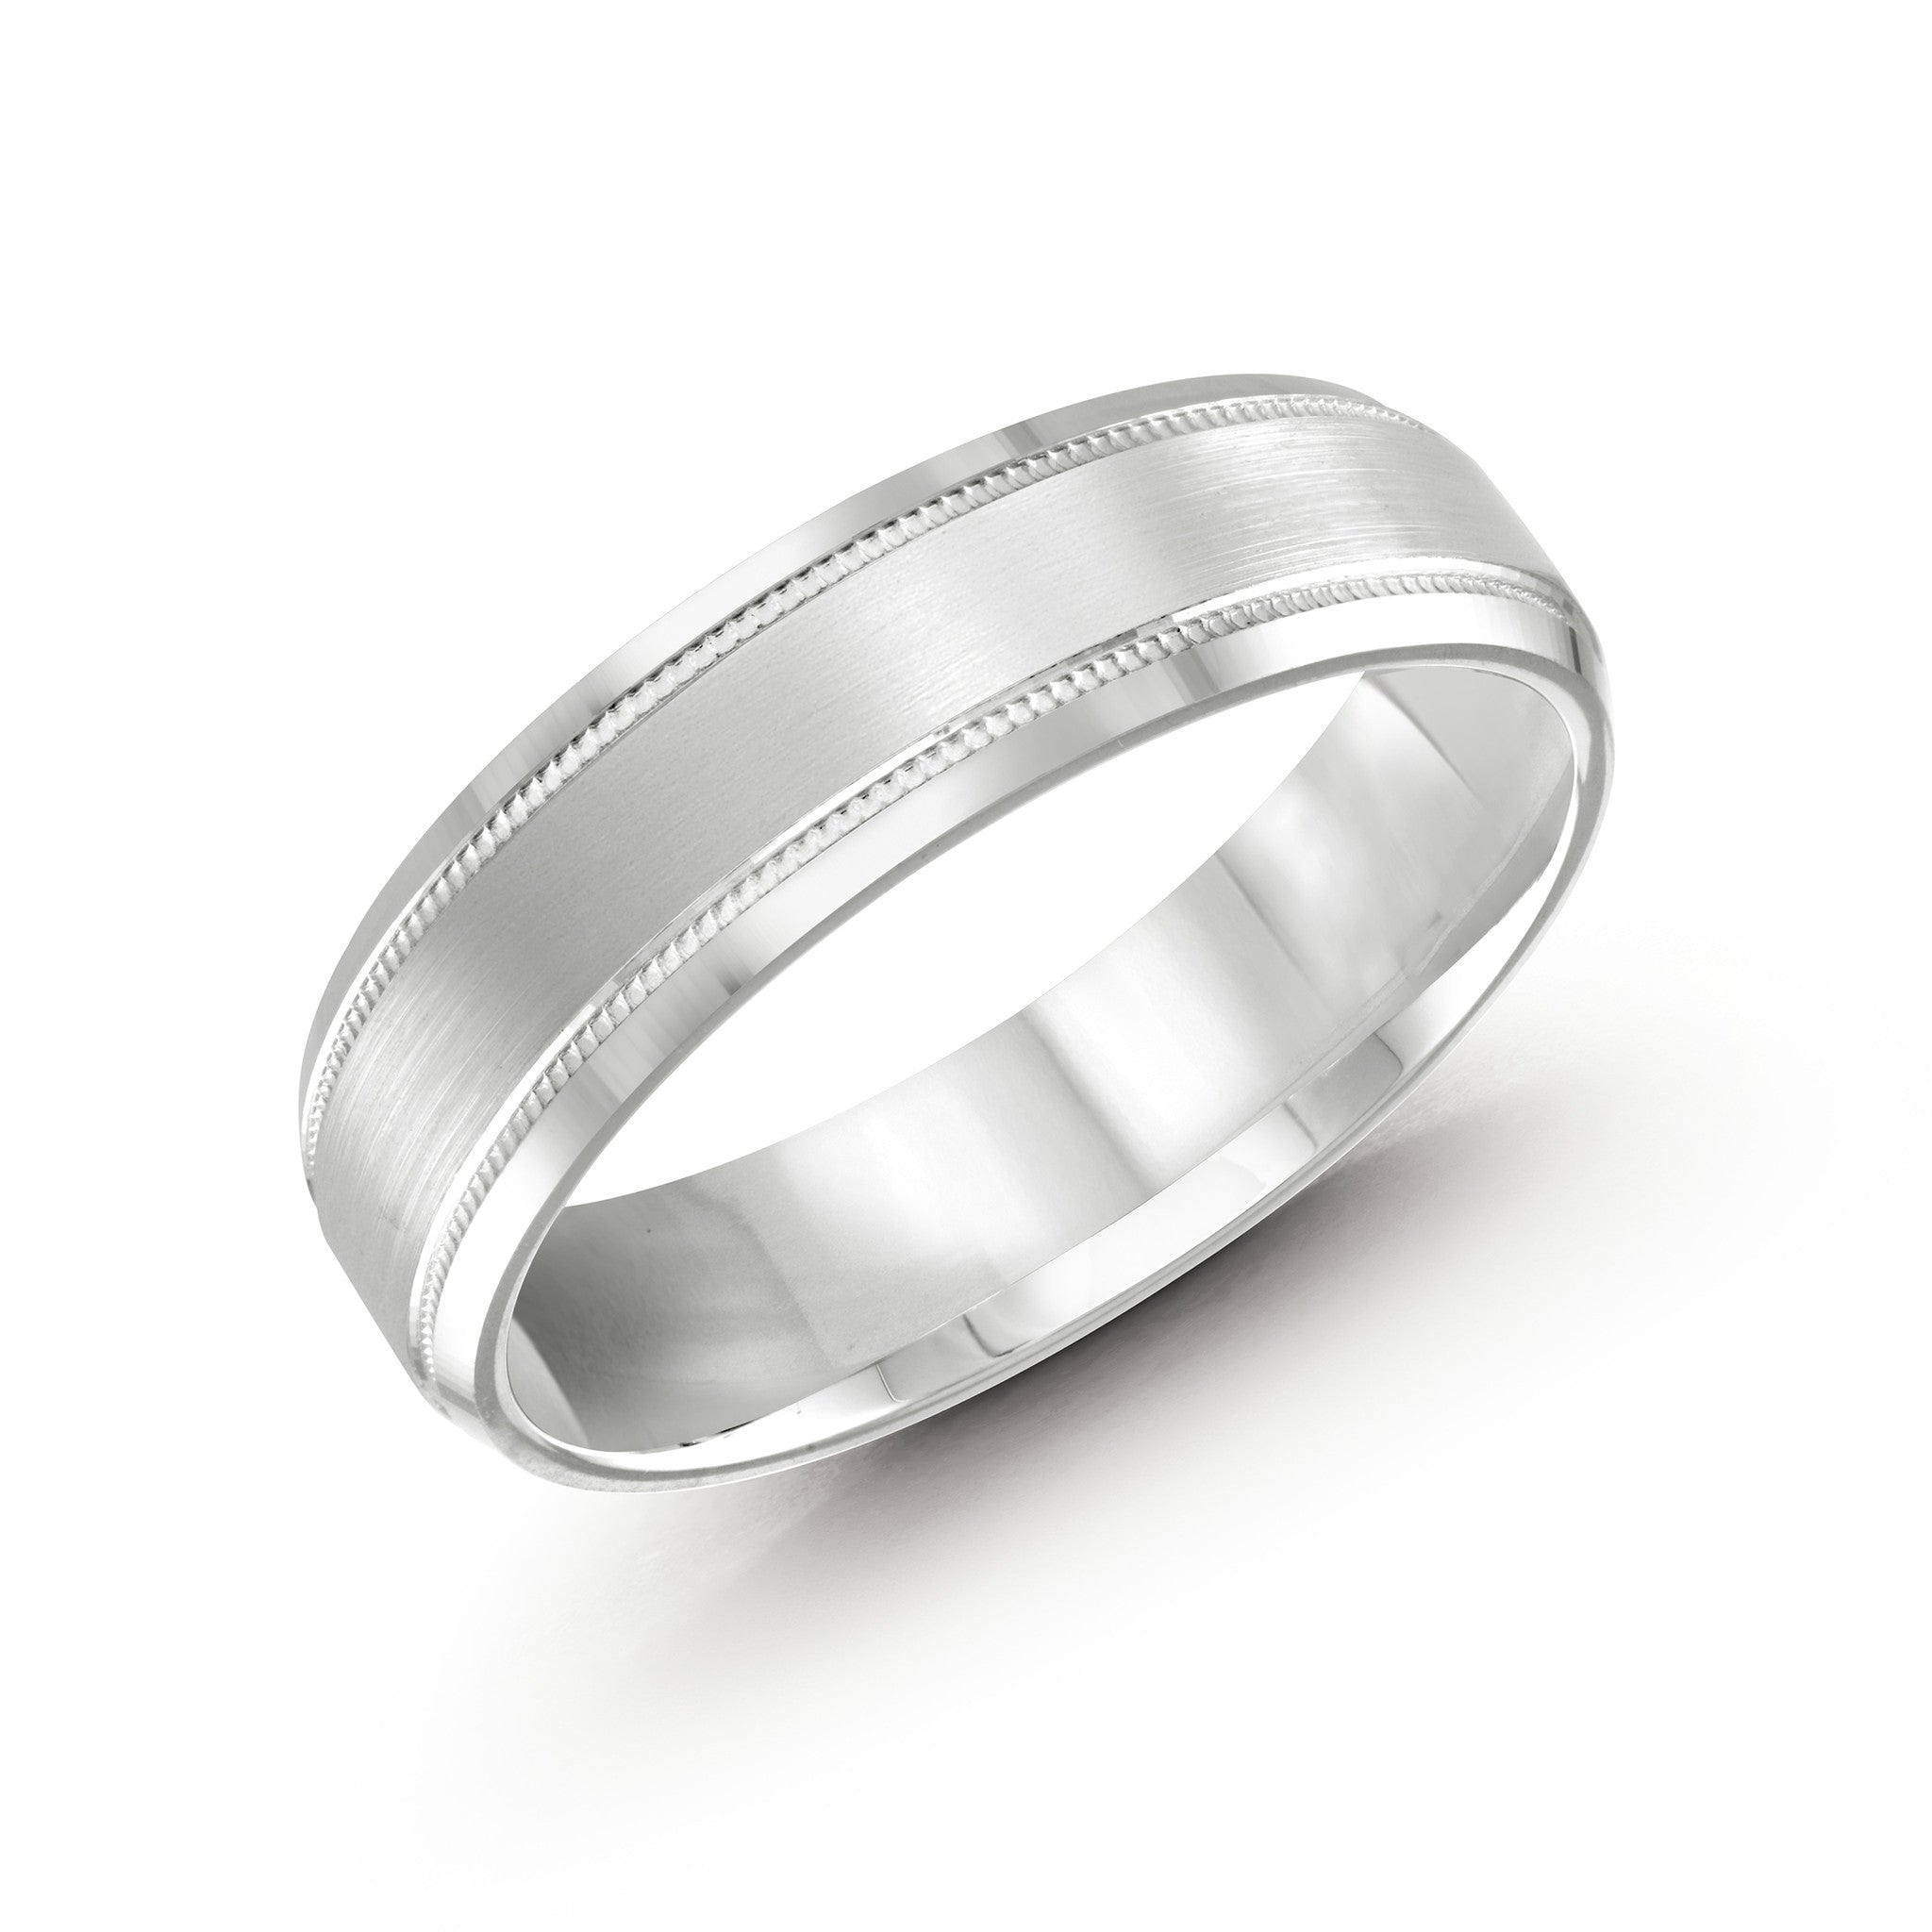 14k White Gold Comfort Fit Ring with Hammer Finish (6mm) | Shane Co.